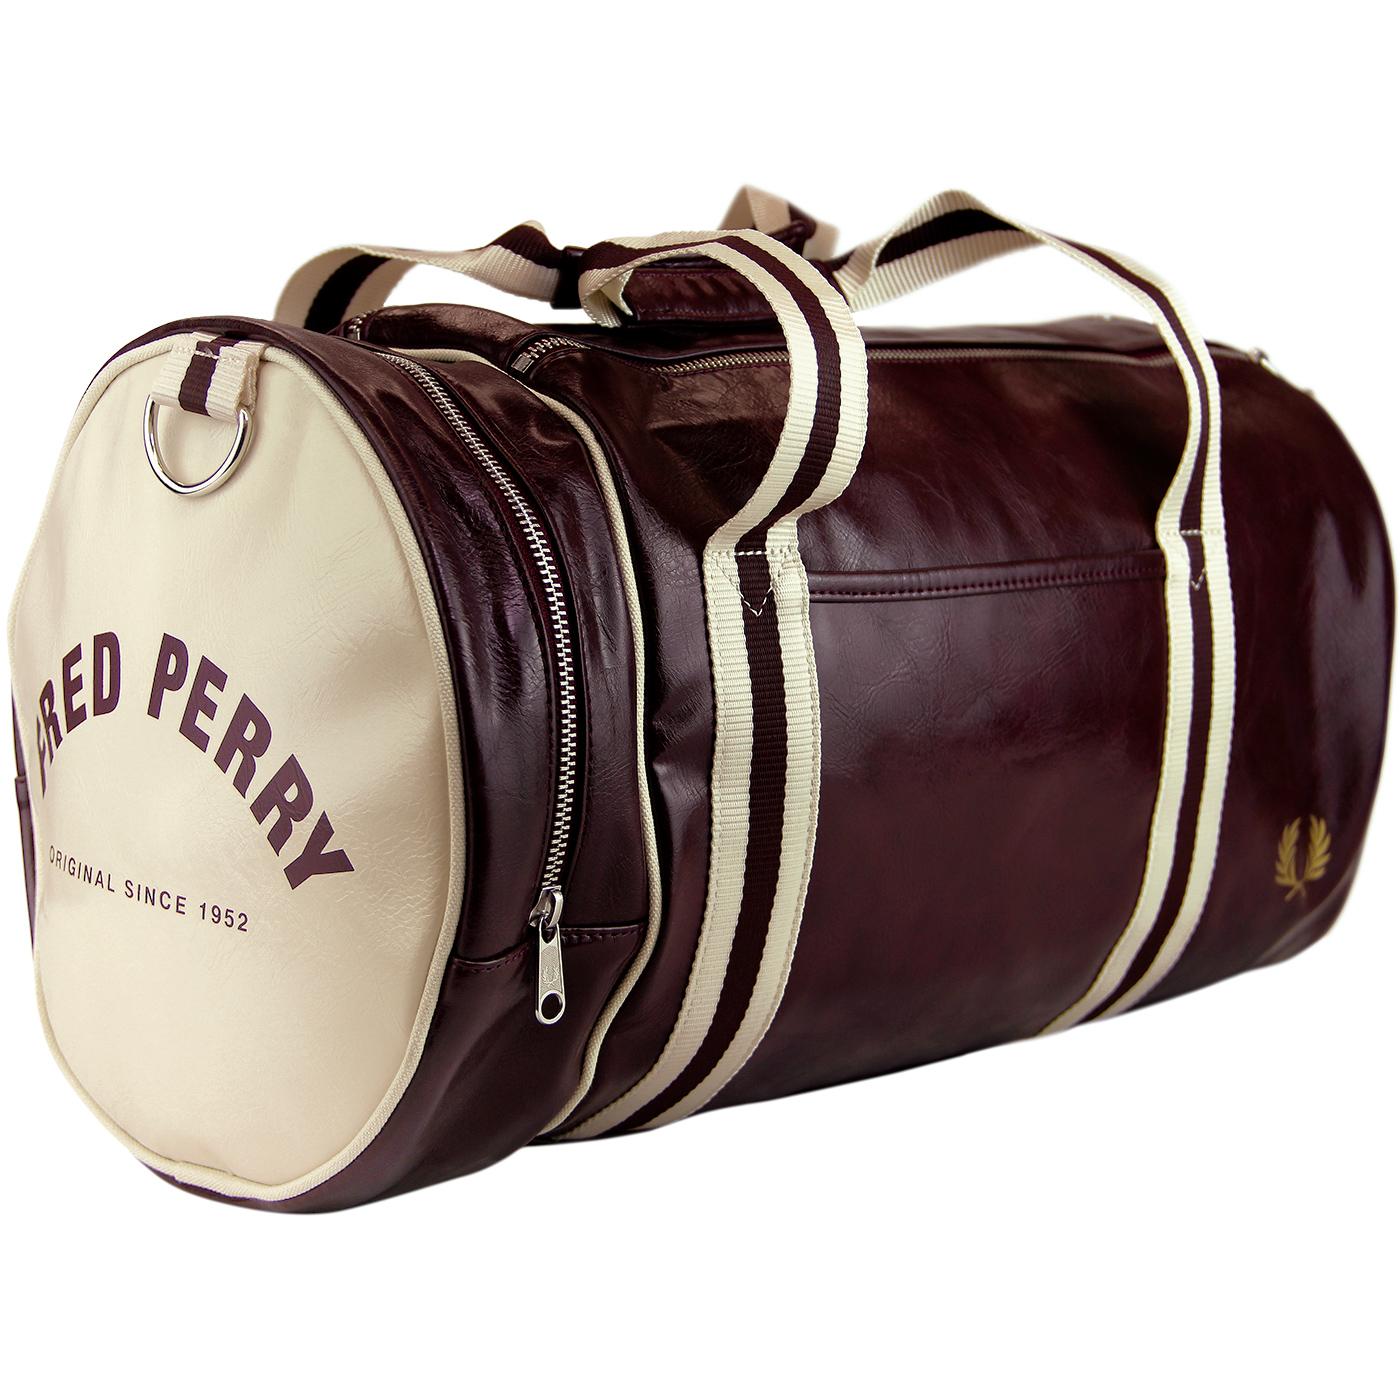 Fred Perry | Bags | Fred Perry Vintage White Barrel Bag | Poshmark